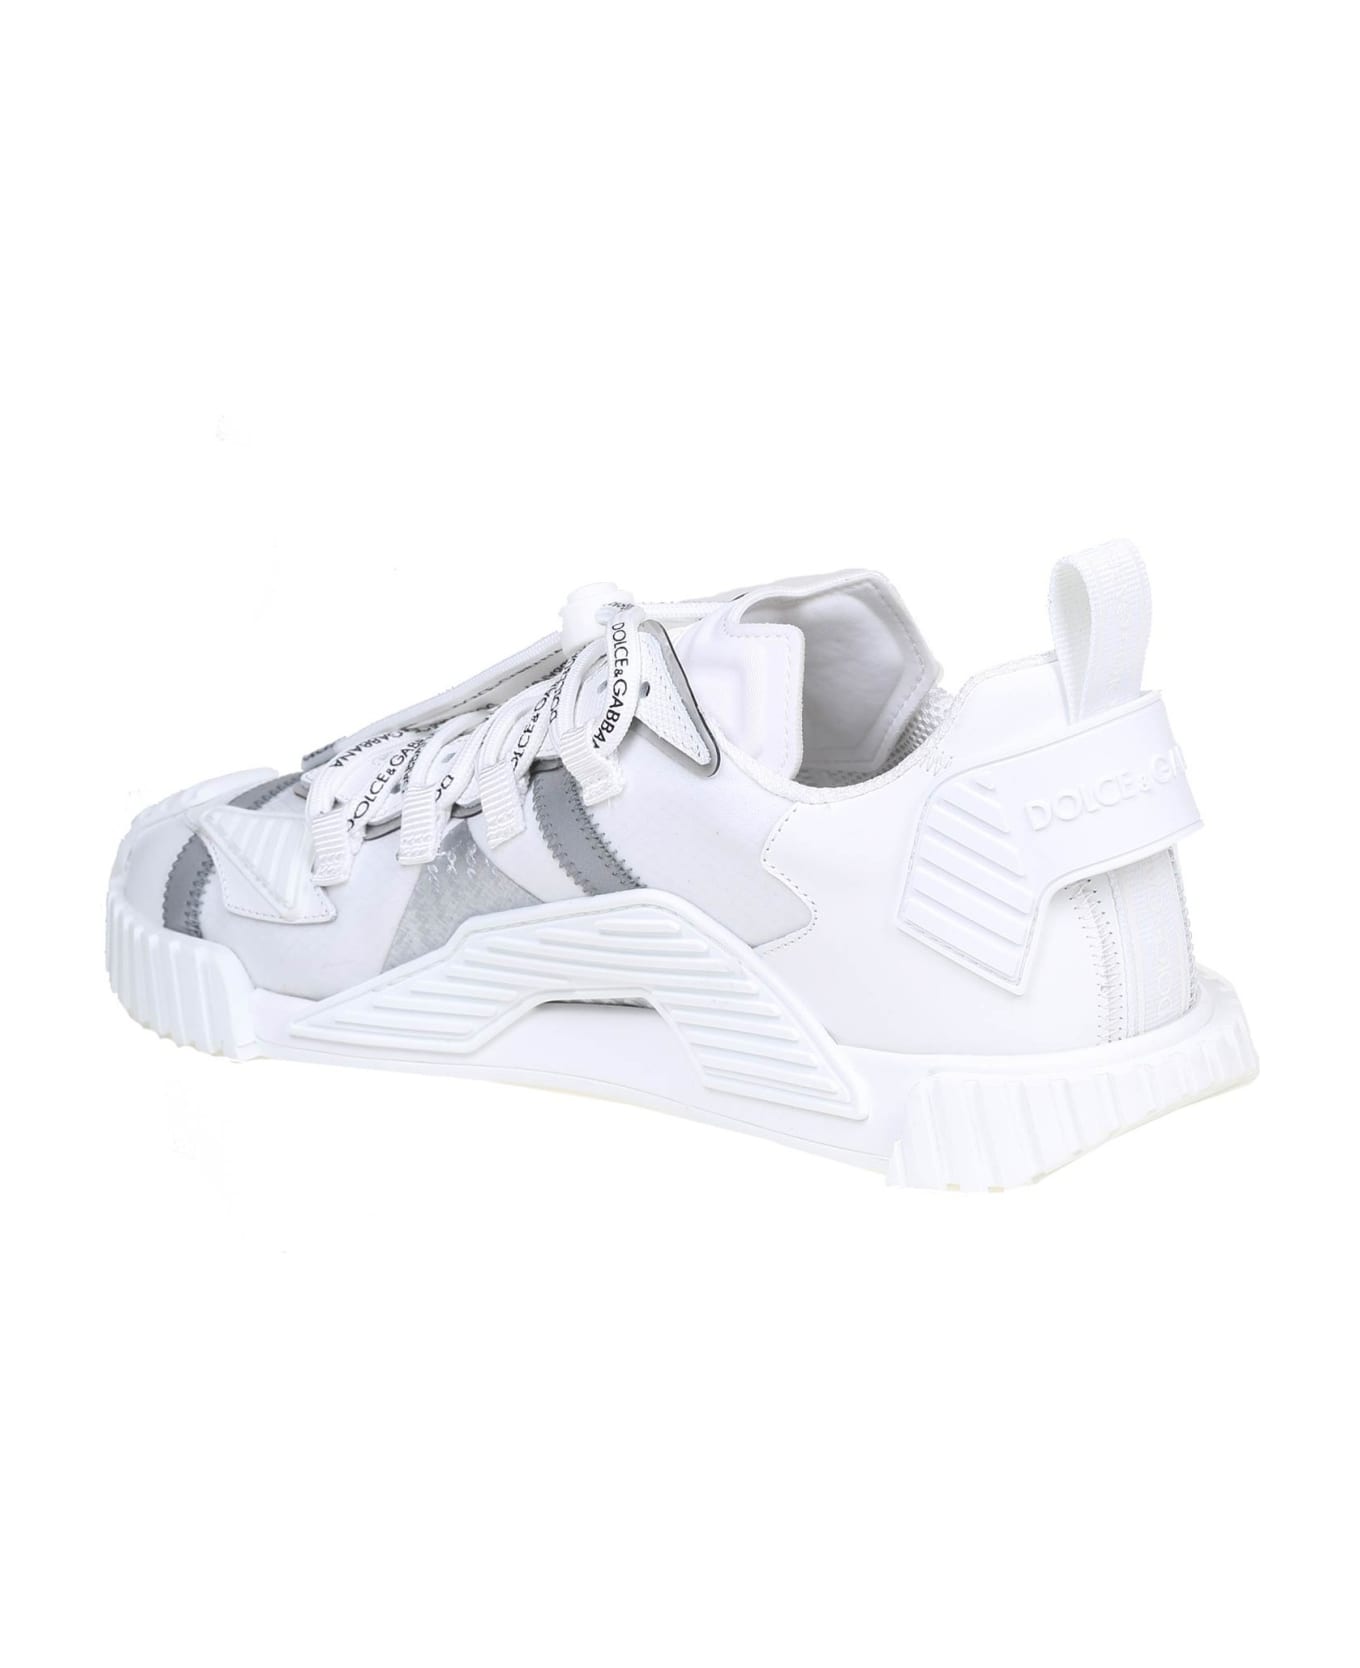 Dolce & Gabbana Sneakers Ns1 In Leather, Mesh And Suede - WHITE